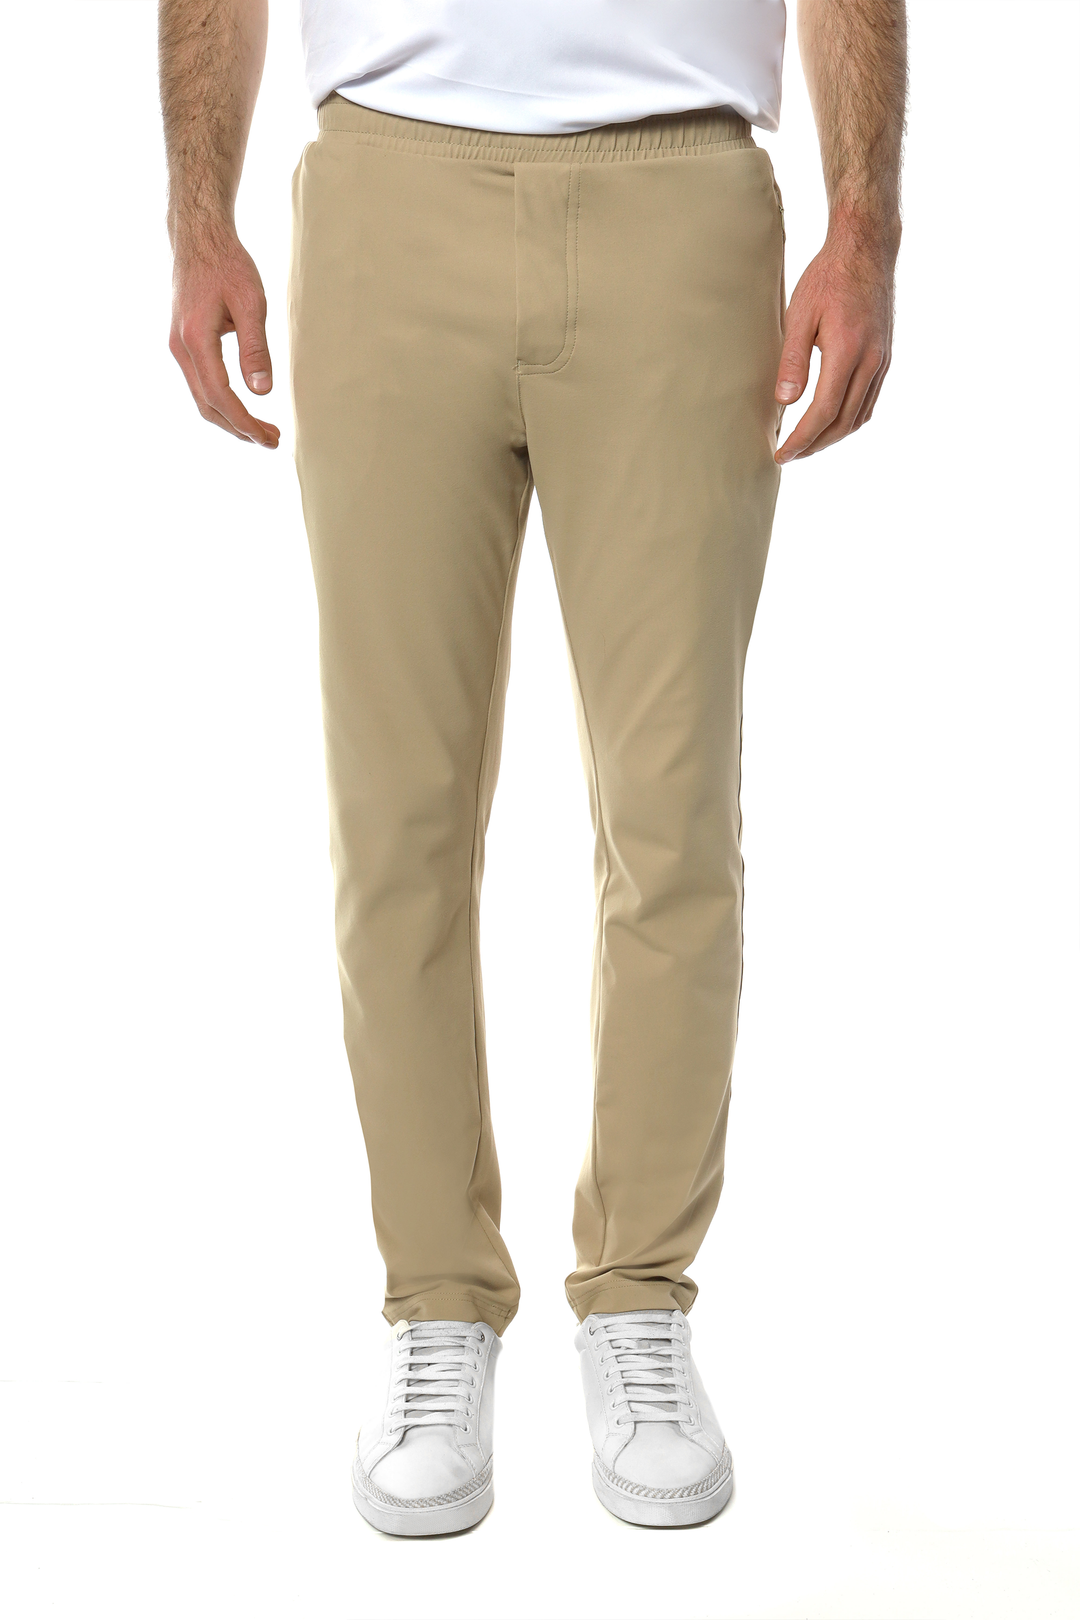 All day pants Beige